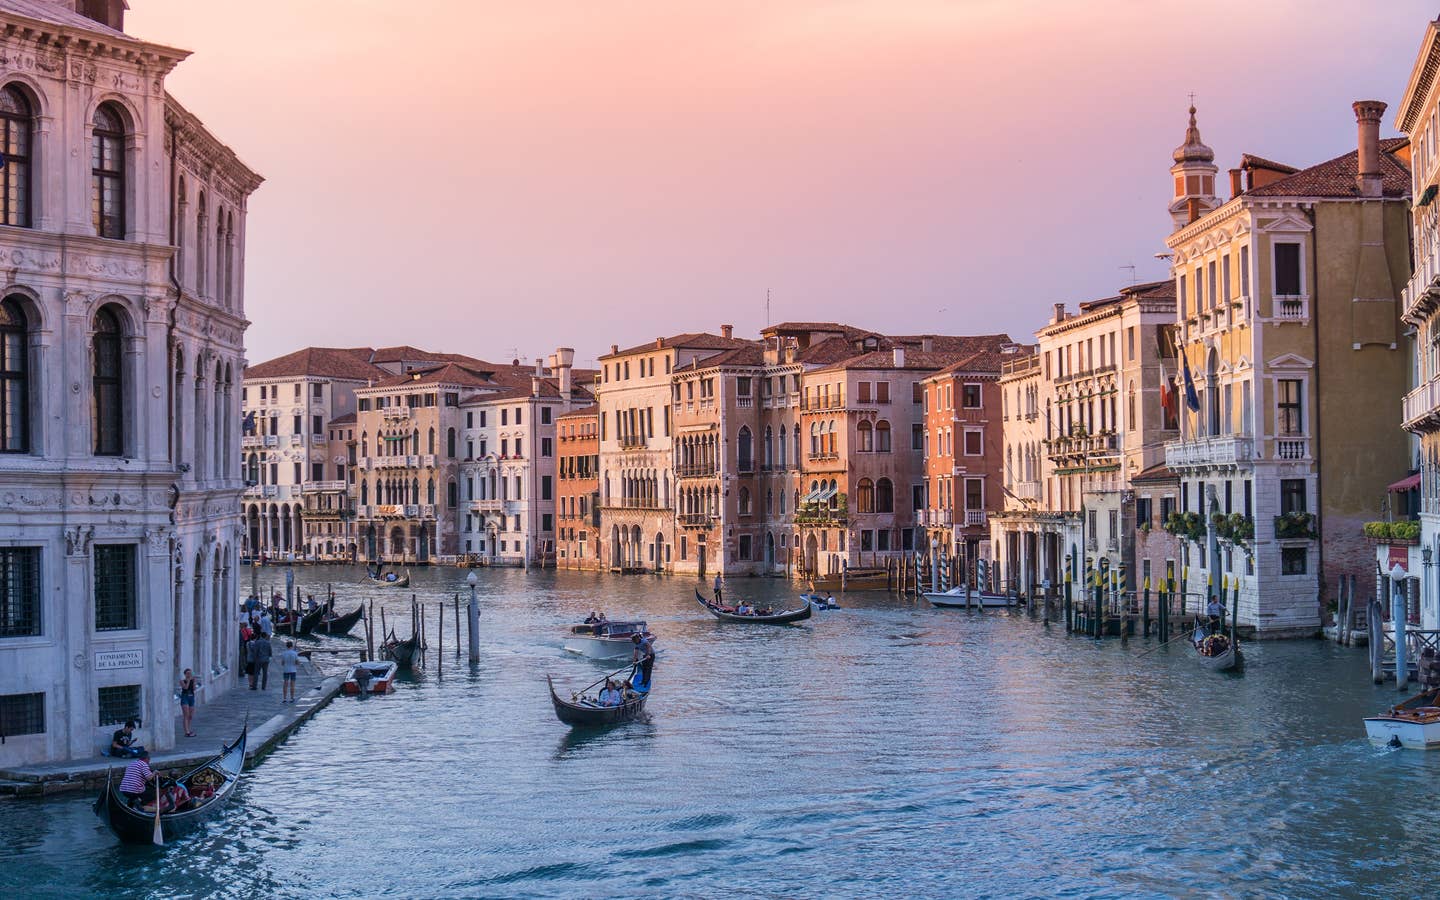 The rivers of Venice with gondolas and structures under sunset pink skies.